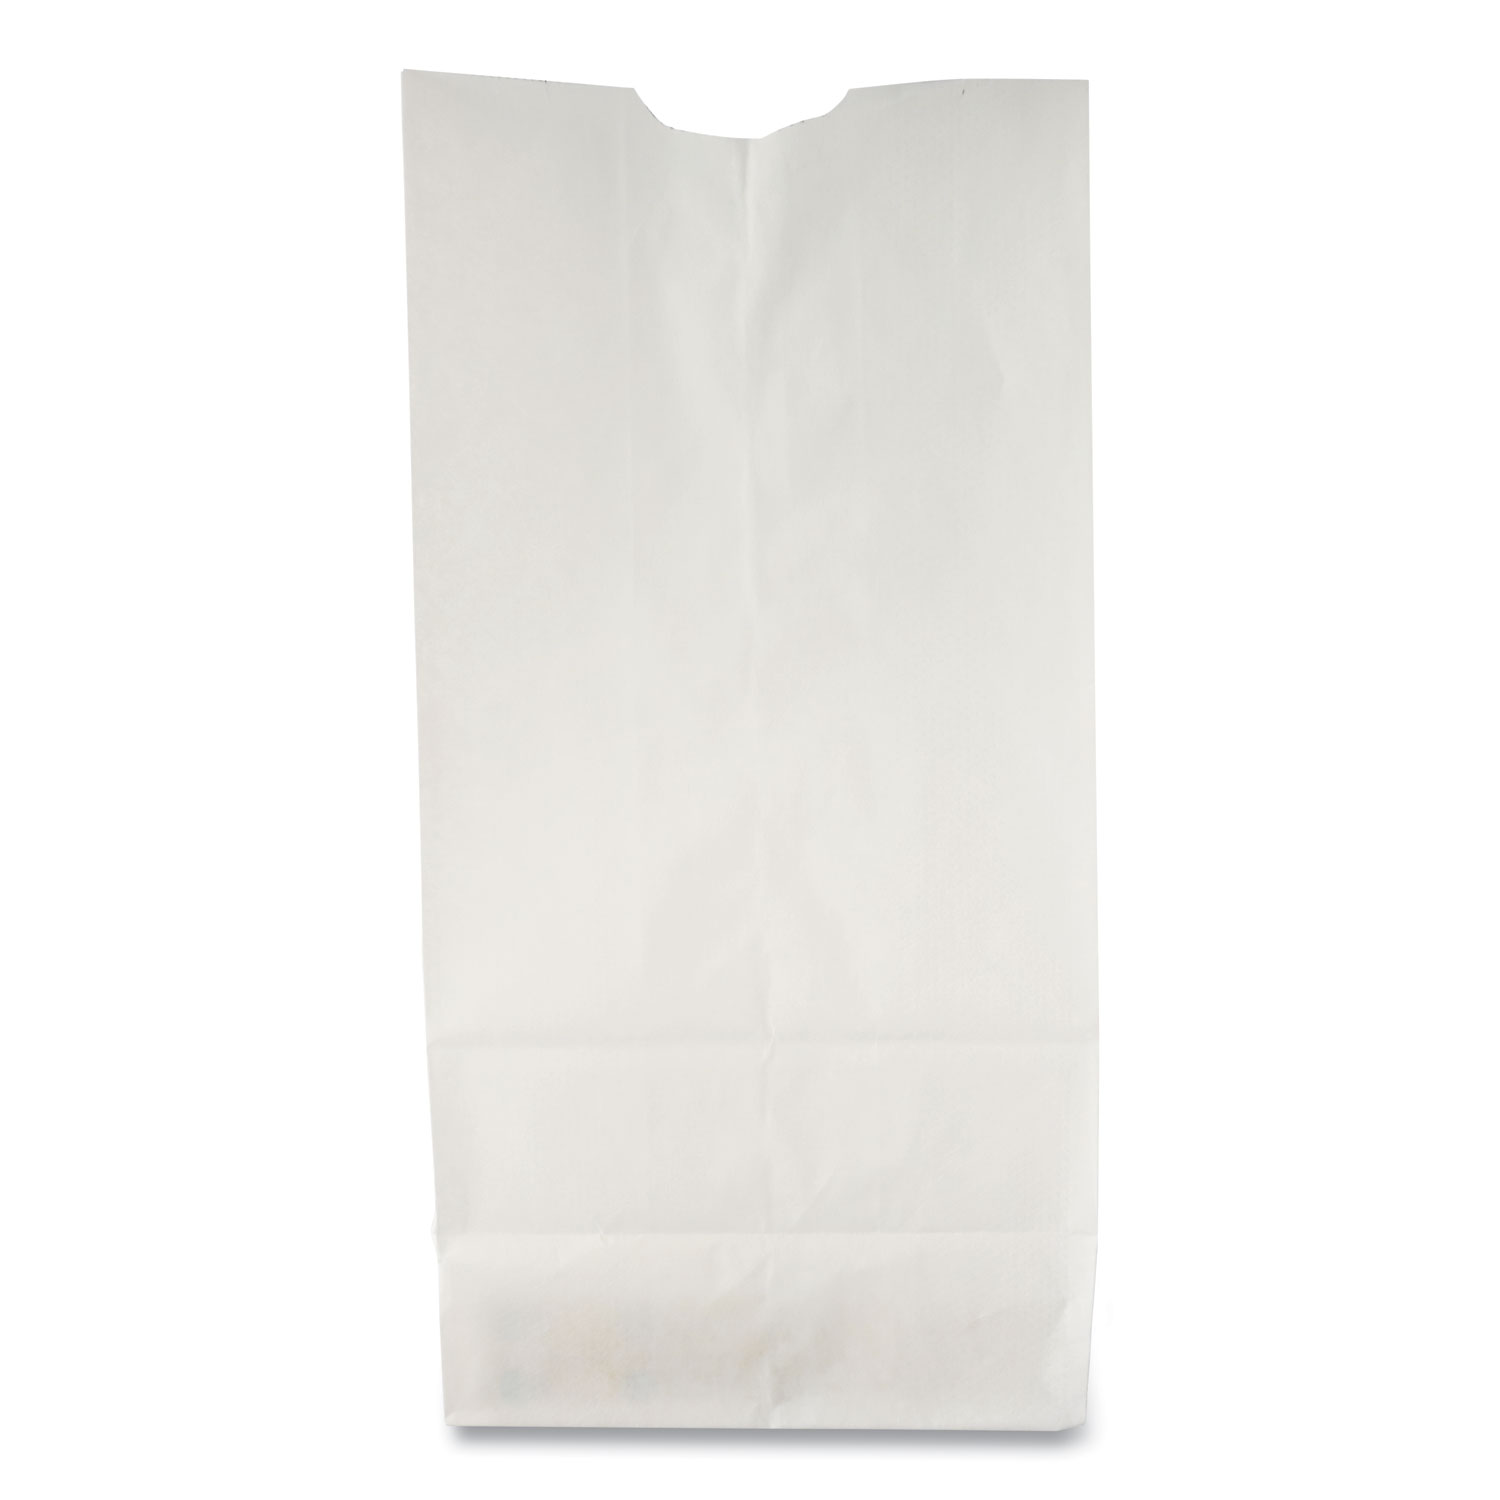 Grocery Paper Bags, 30 lb Capacity, #2, 4.31" x 2.44" x 7.88", White, 500 Bags